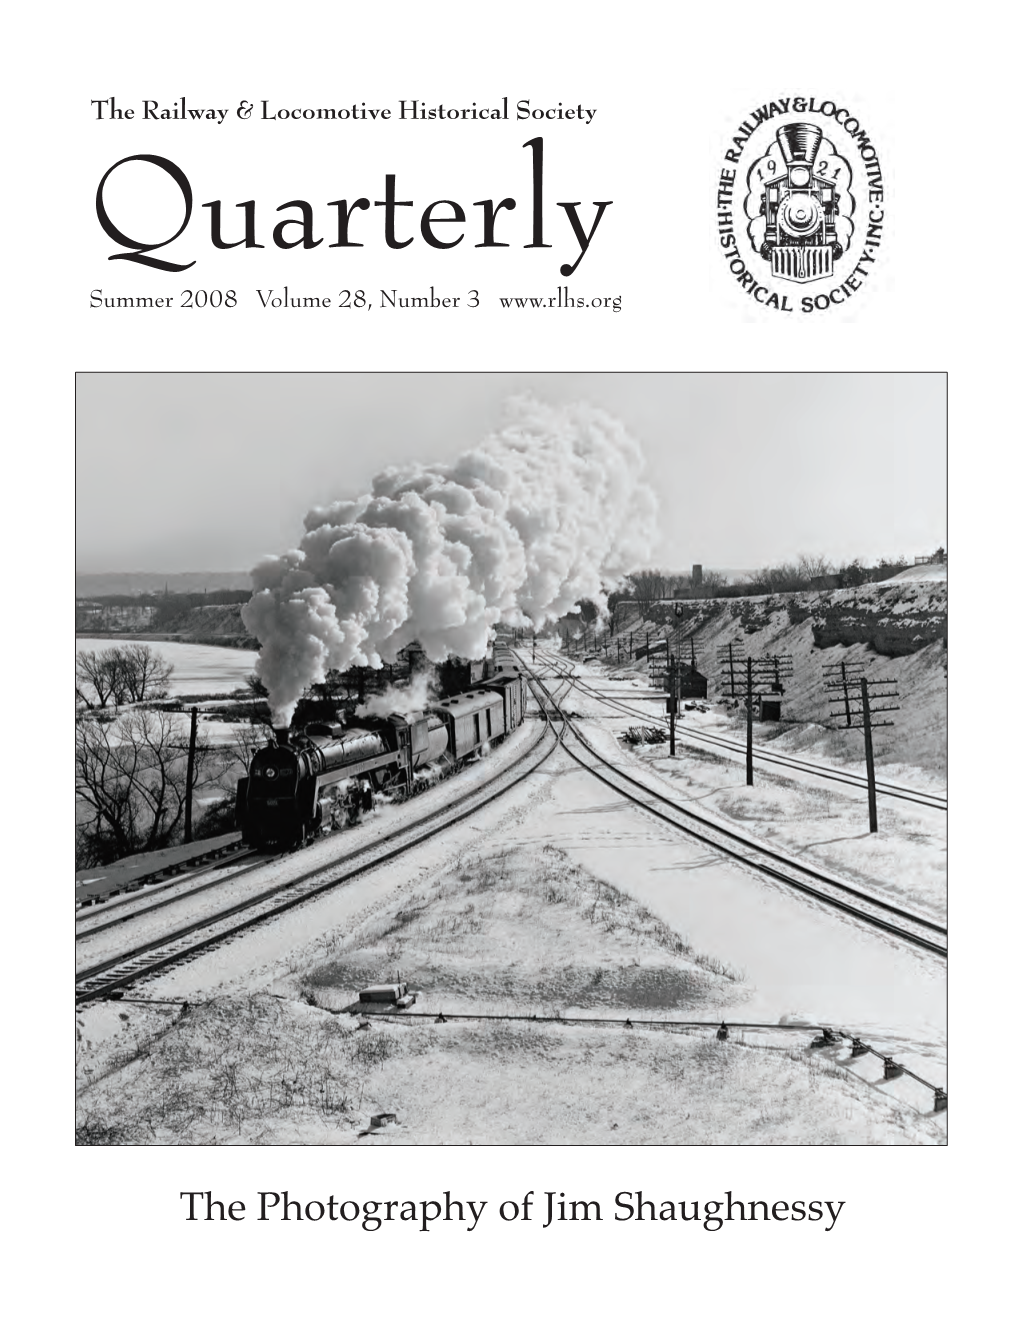 The Photography of Jim Shaughnessy the Railway & Locomotive Historical Society Quarterly Summer 2008 Volume 28, Number 3 Contents